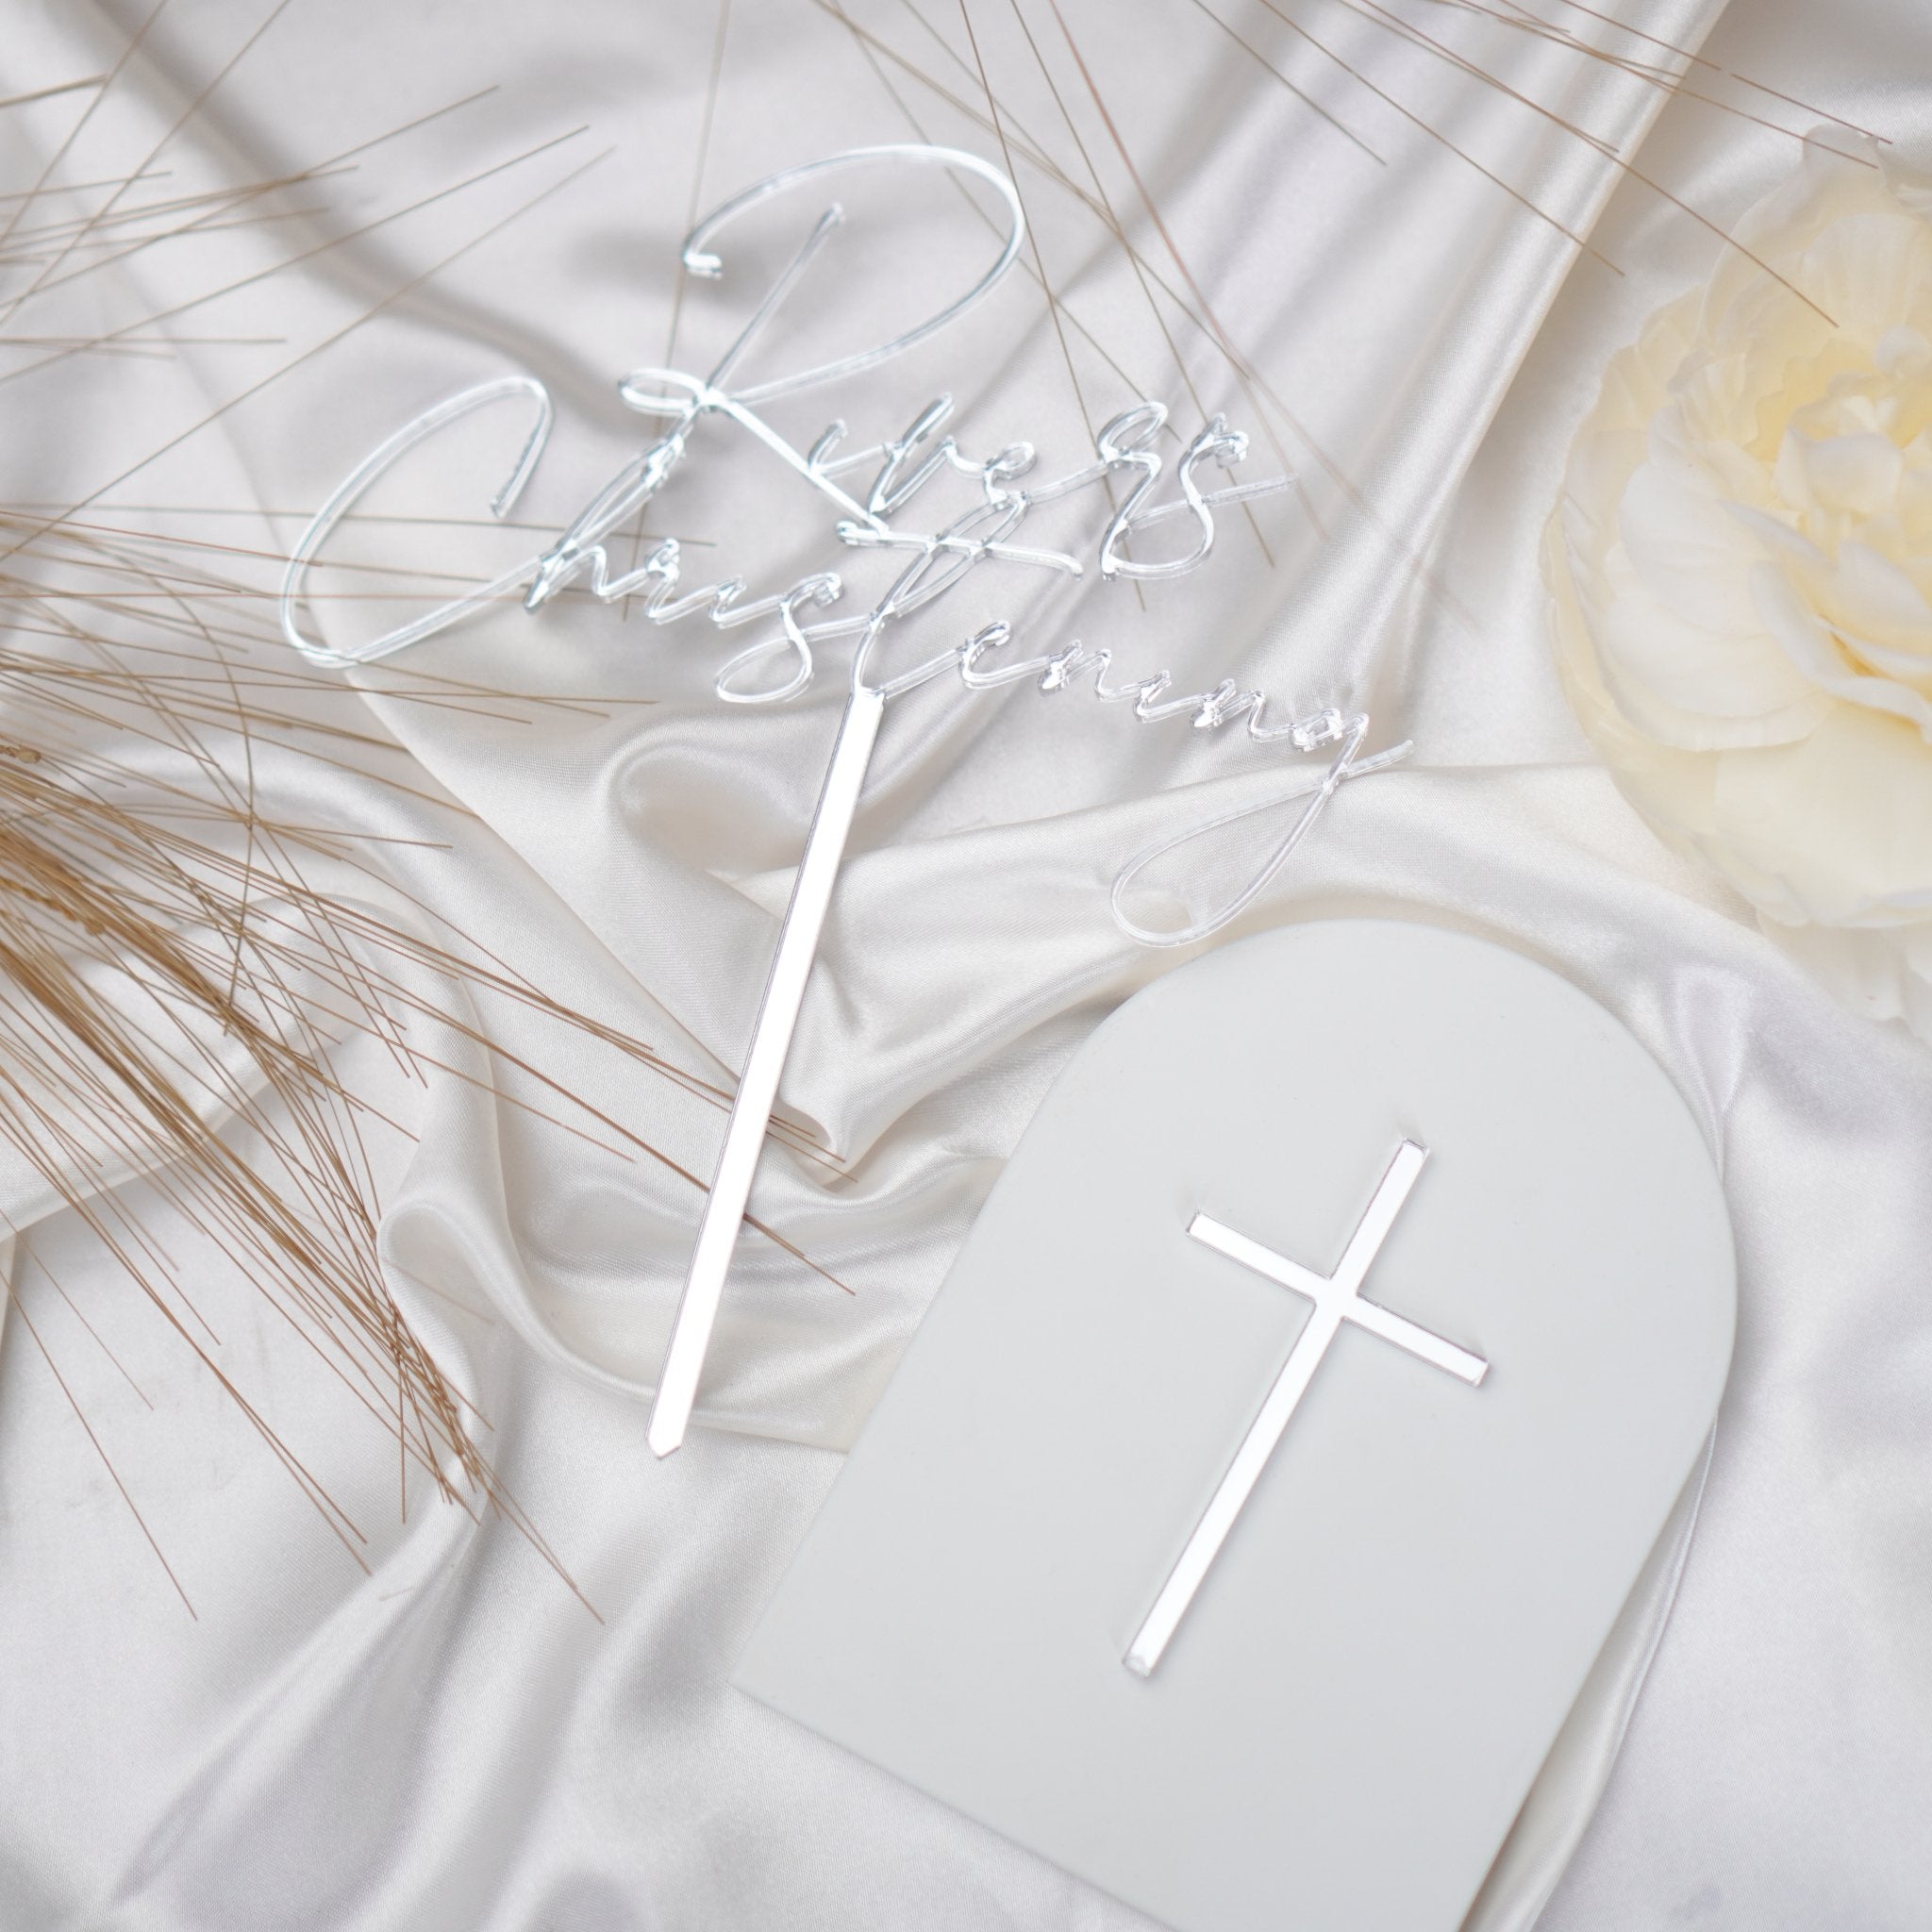 Christening cake Topper with Separate Cross